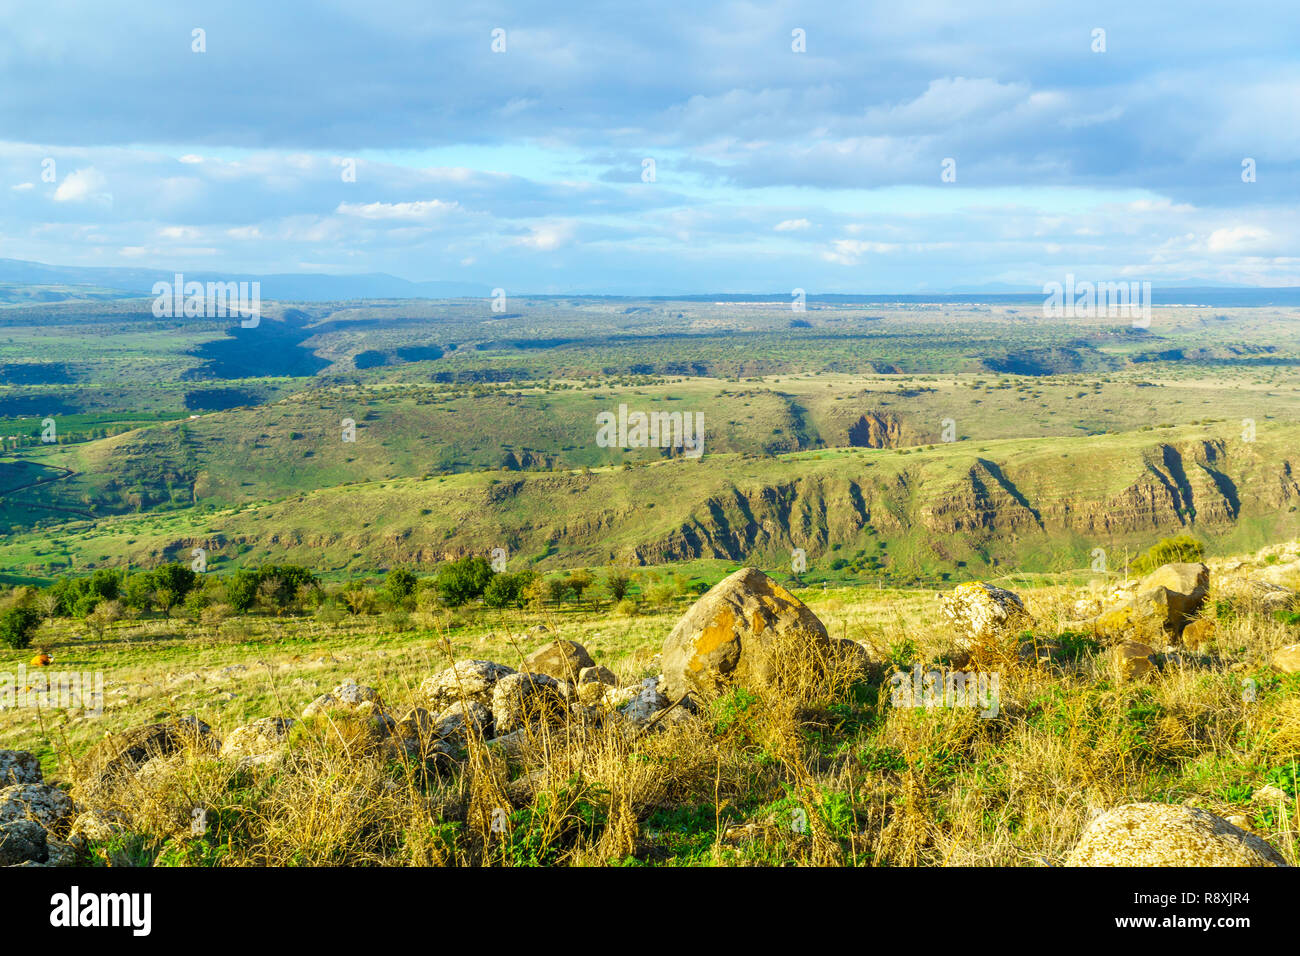 Landscape of the Jordan valley and the slopes of the Golan Heights,  Northern Israel Stock Photo - Alamy